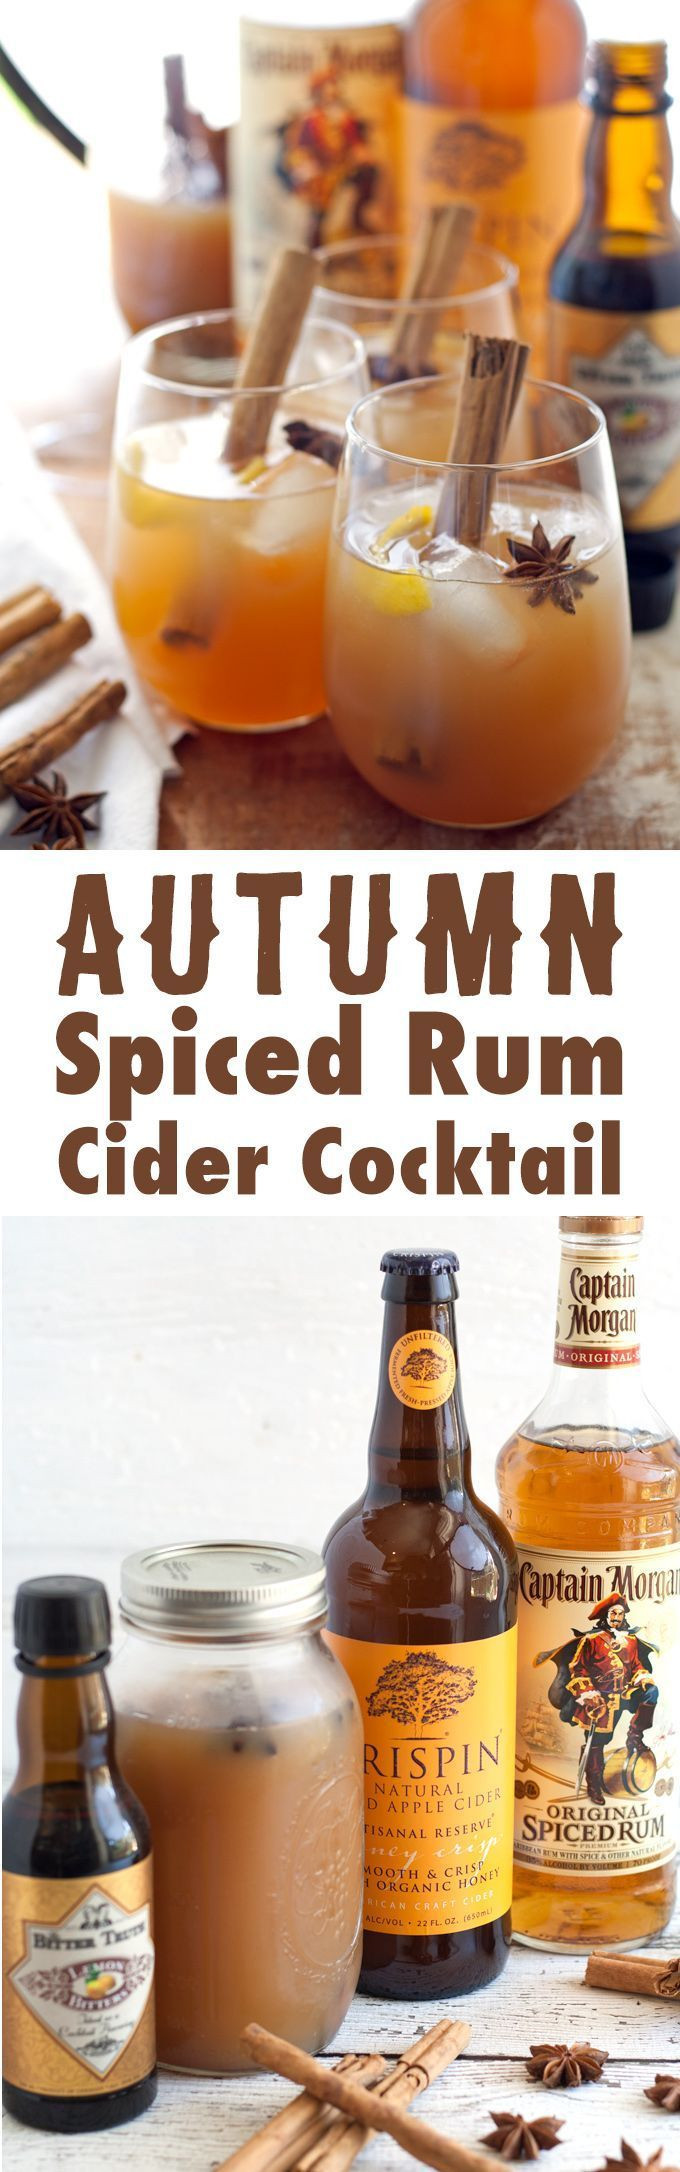 Spiced Rum Drinks
 Autumn Spiced Rum Cider Cocktail the perfect autumn